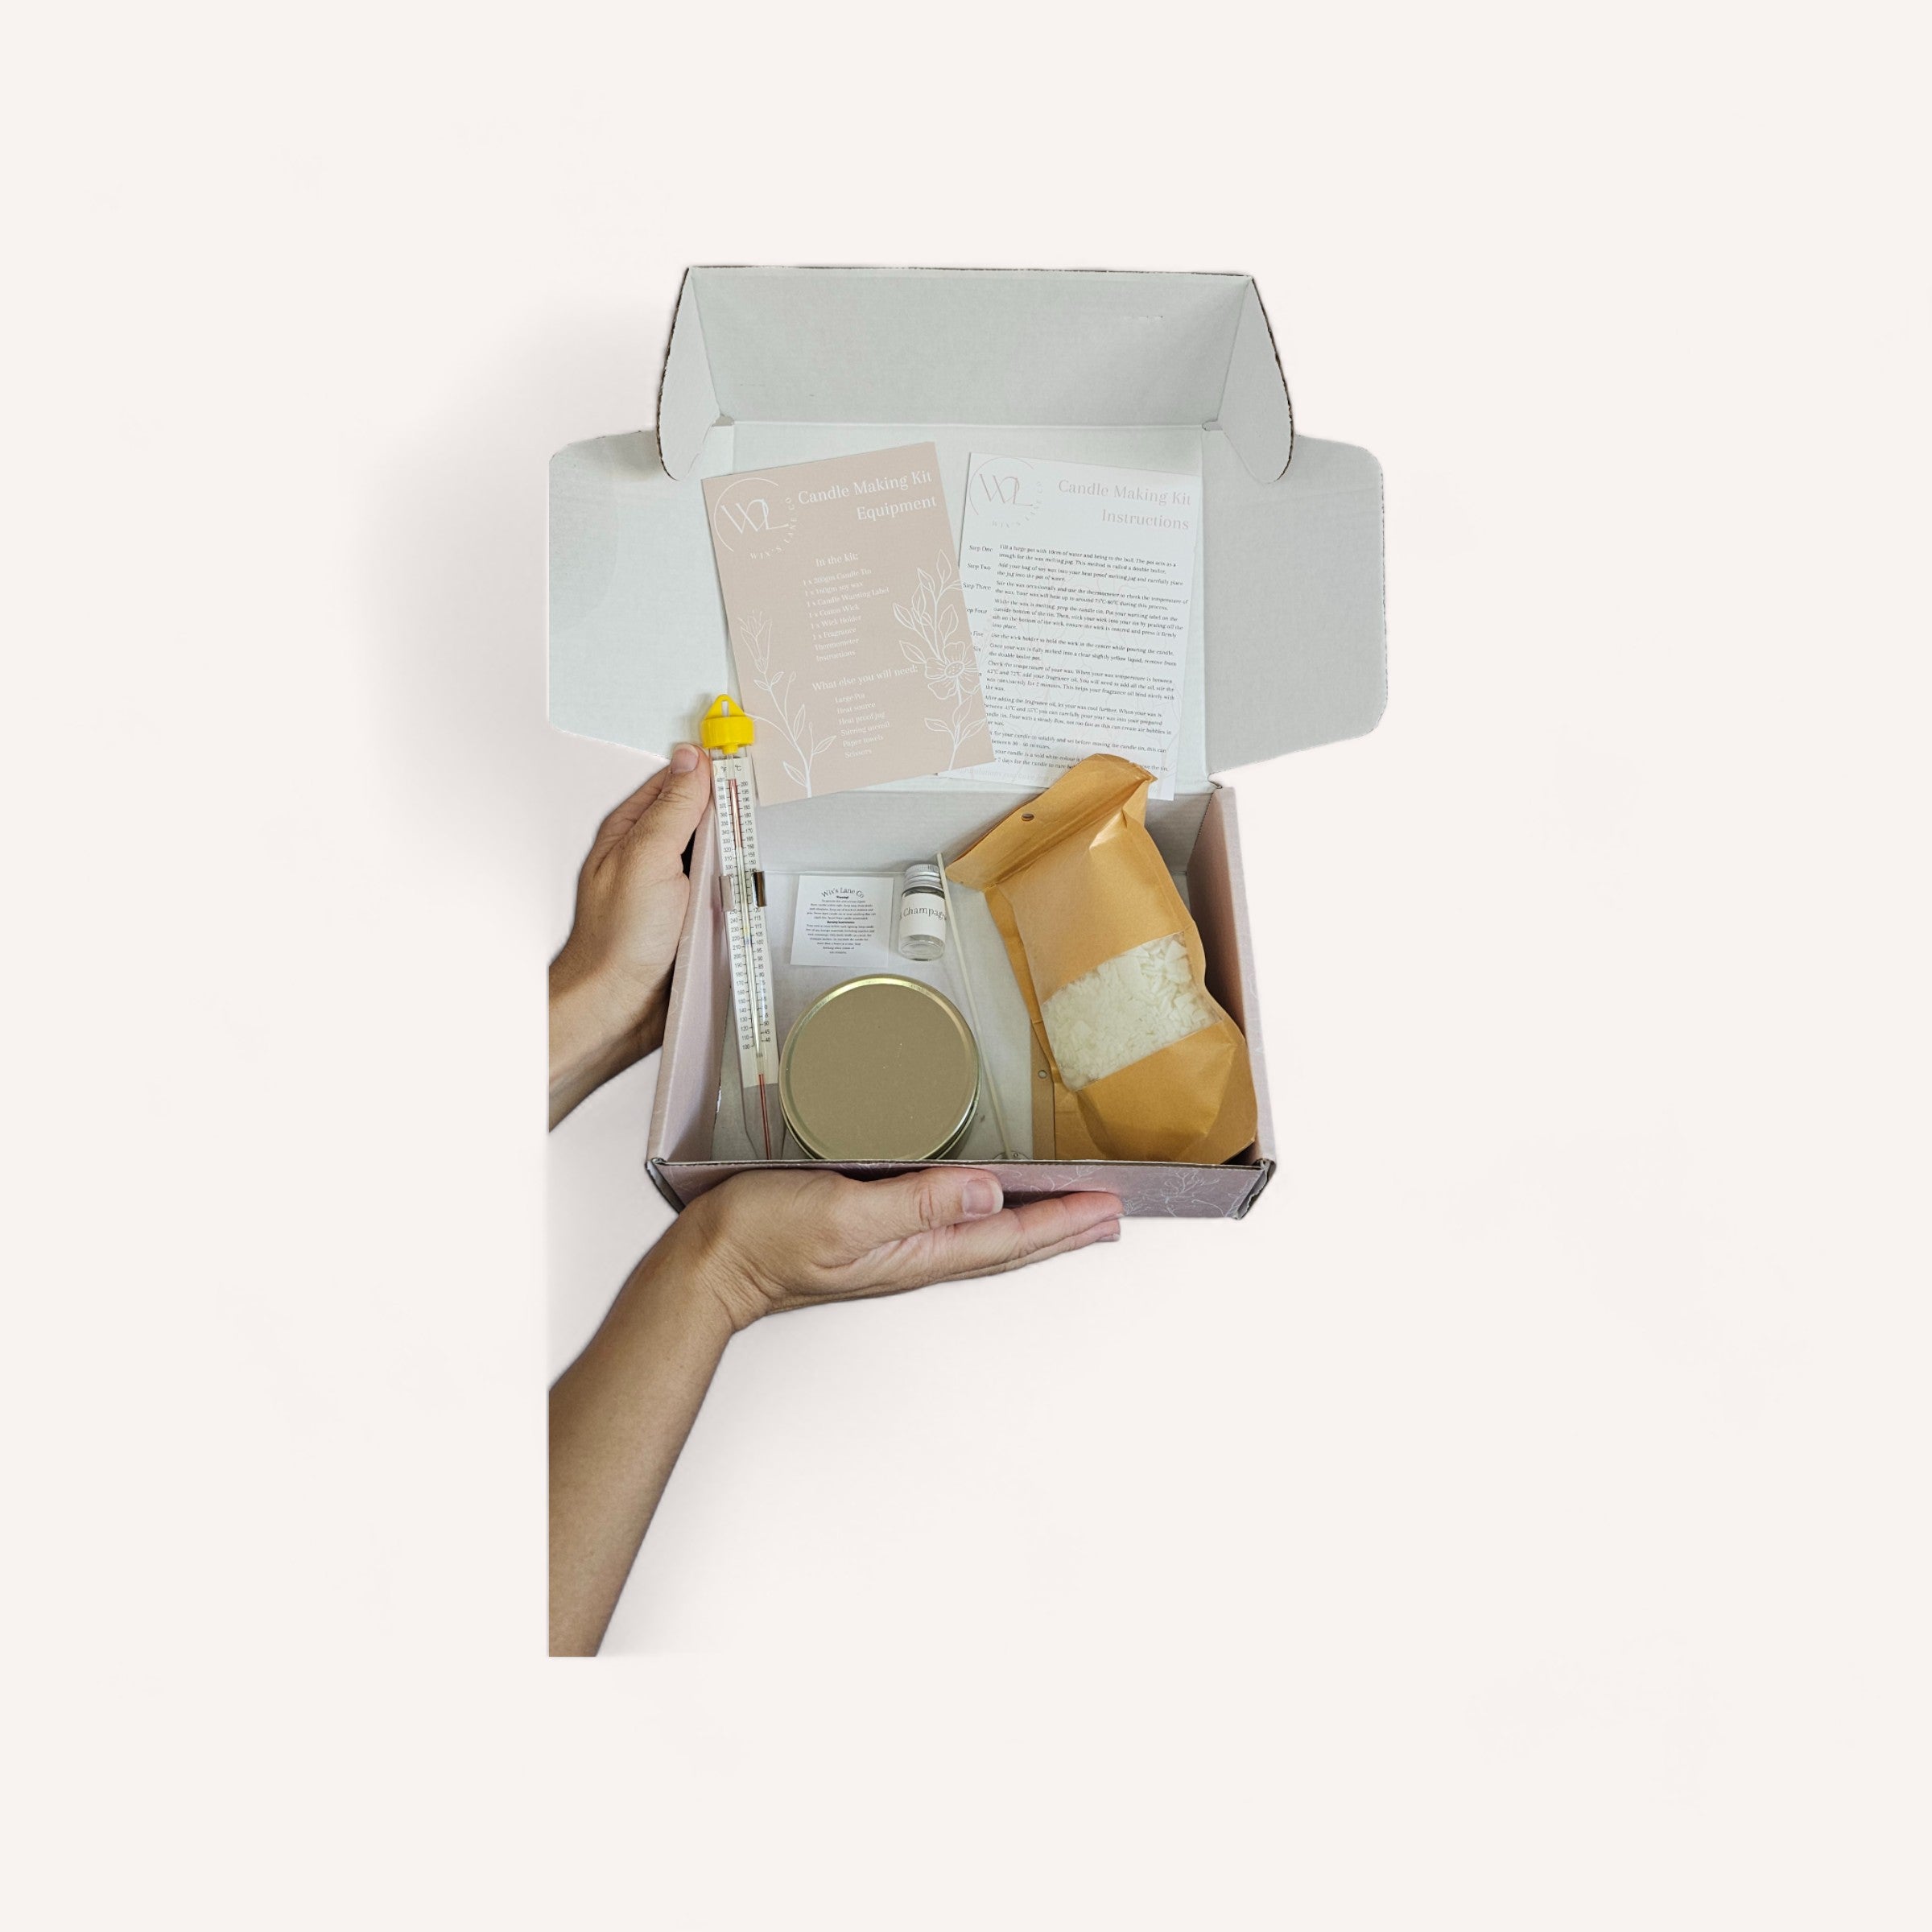 A person holding an open box filled with an assortment of skincare products and a Candle Making Kit by Wix's Lane Co against a white background.